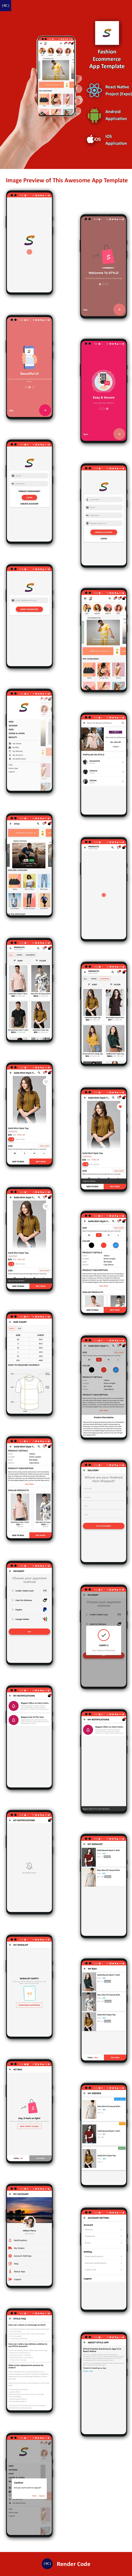 Fashion Ecommerce Android App + Fashion Ecommerce iOS App Template | React Native | Stylo - 6